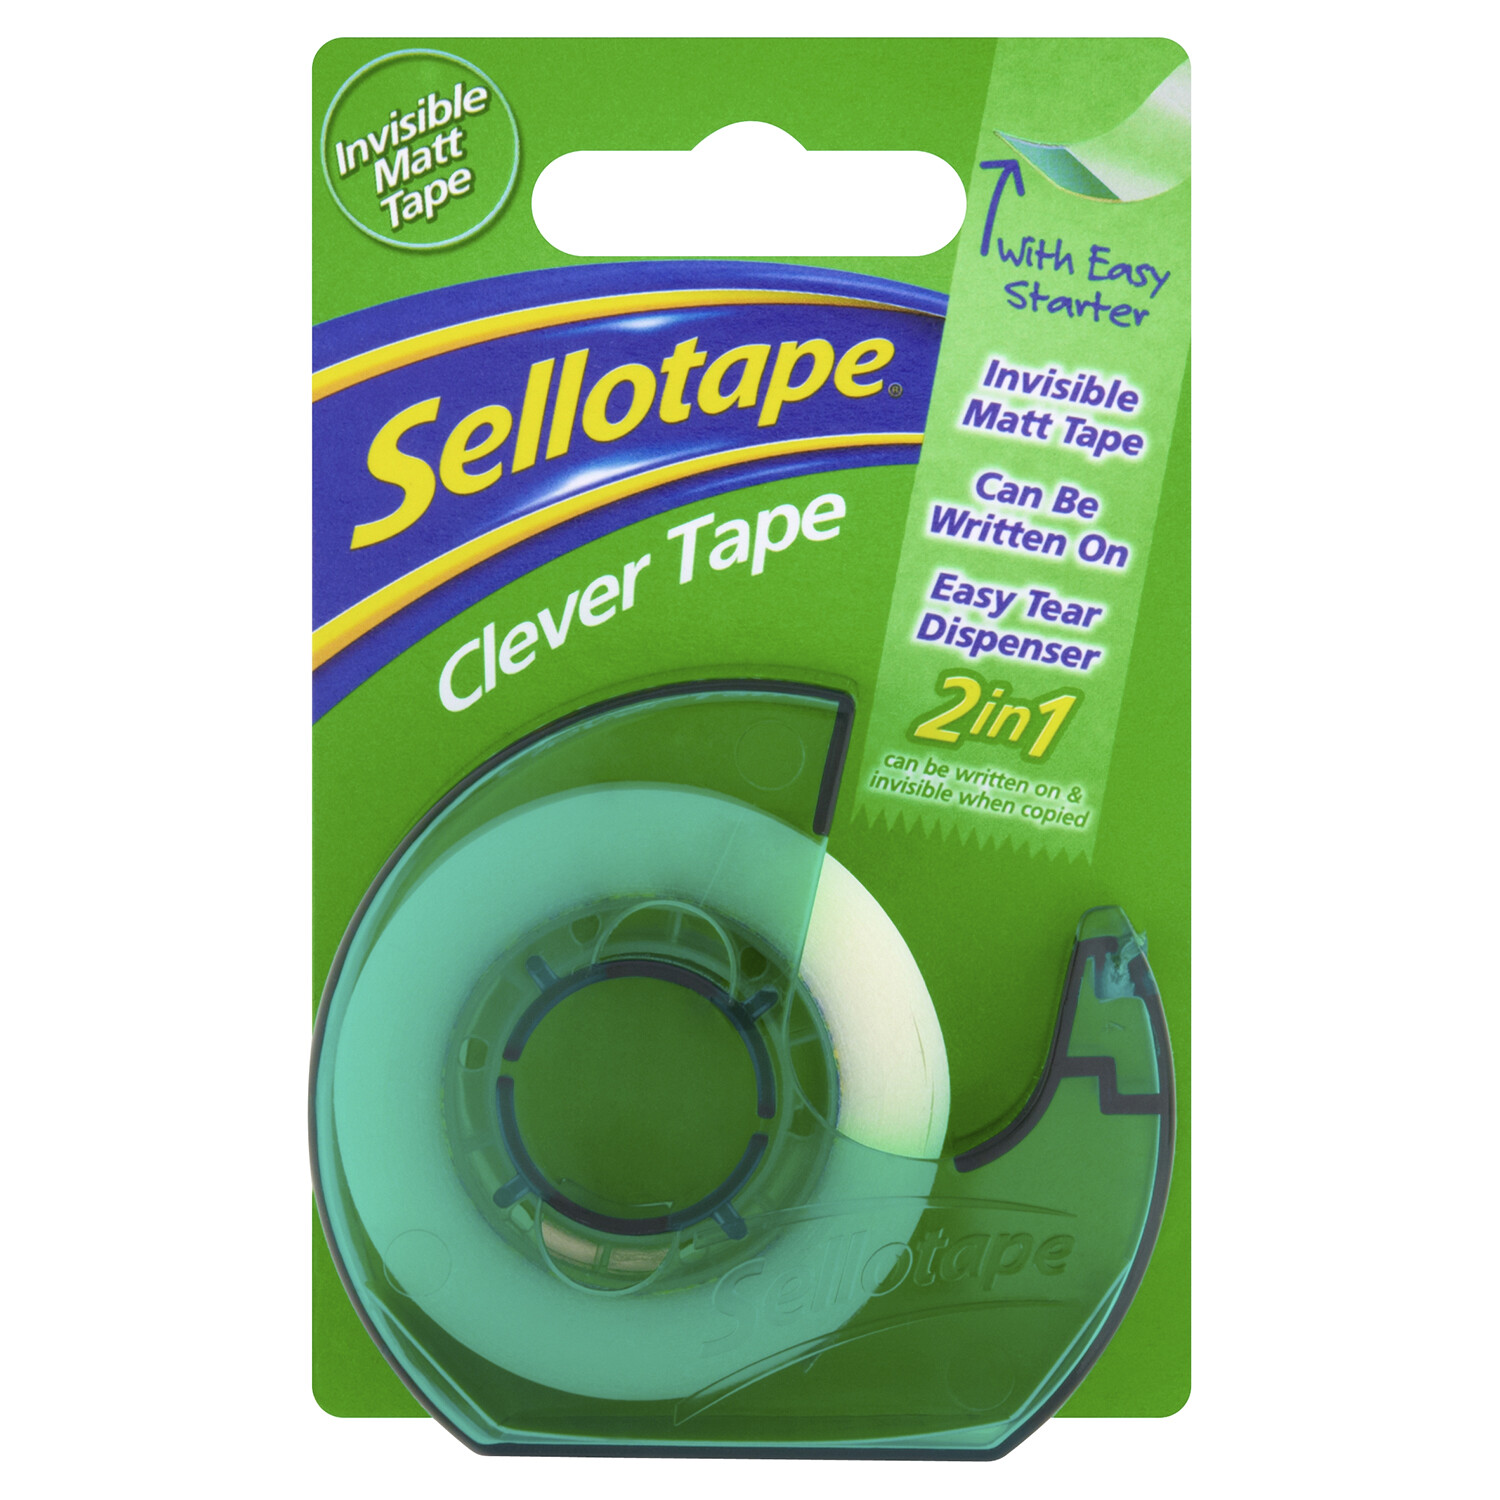 Sellotape Clever Tape with Dispenser - White Image